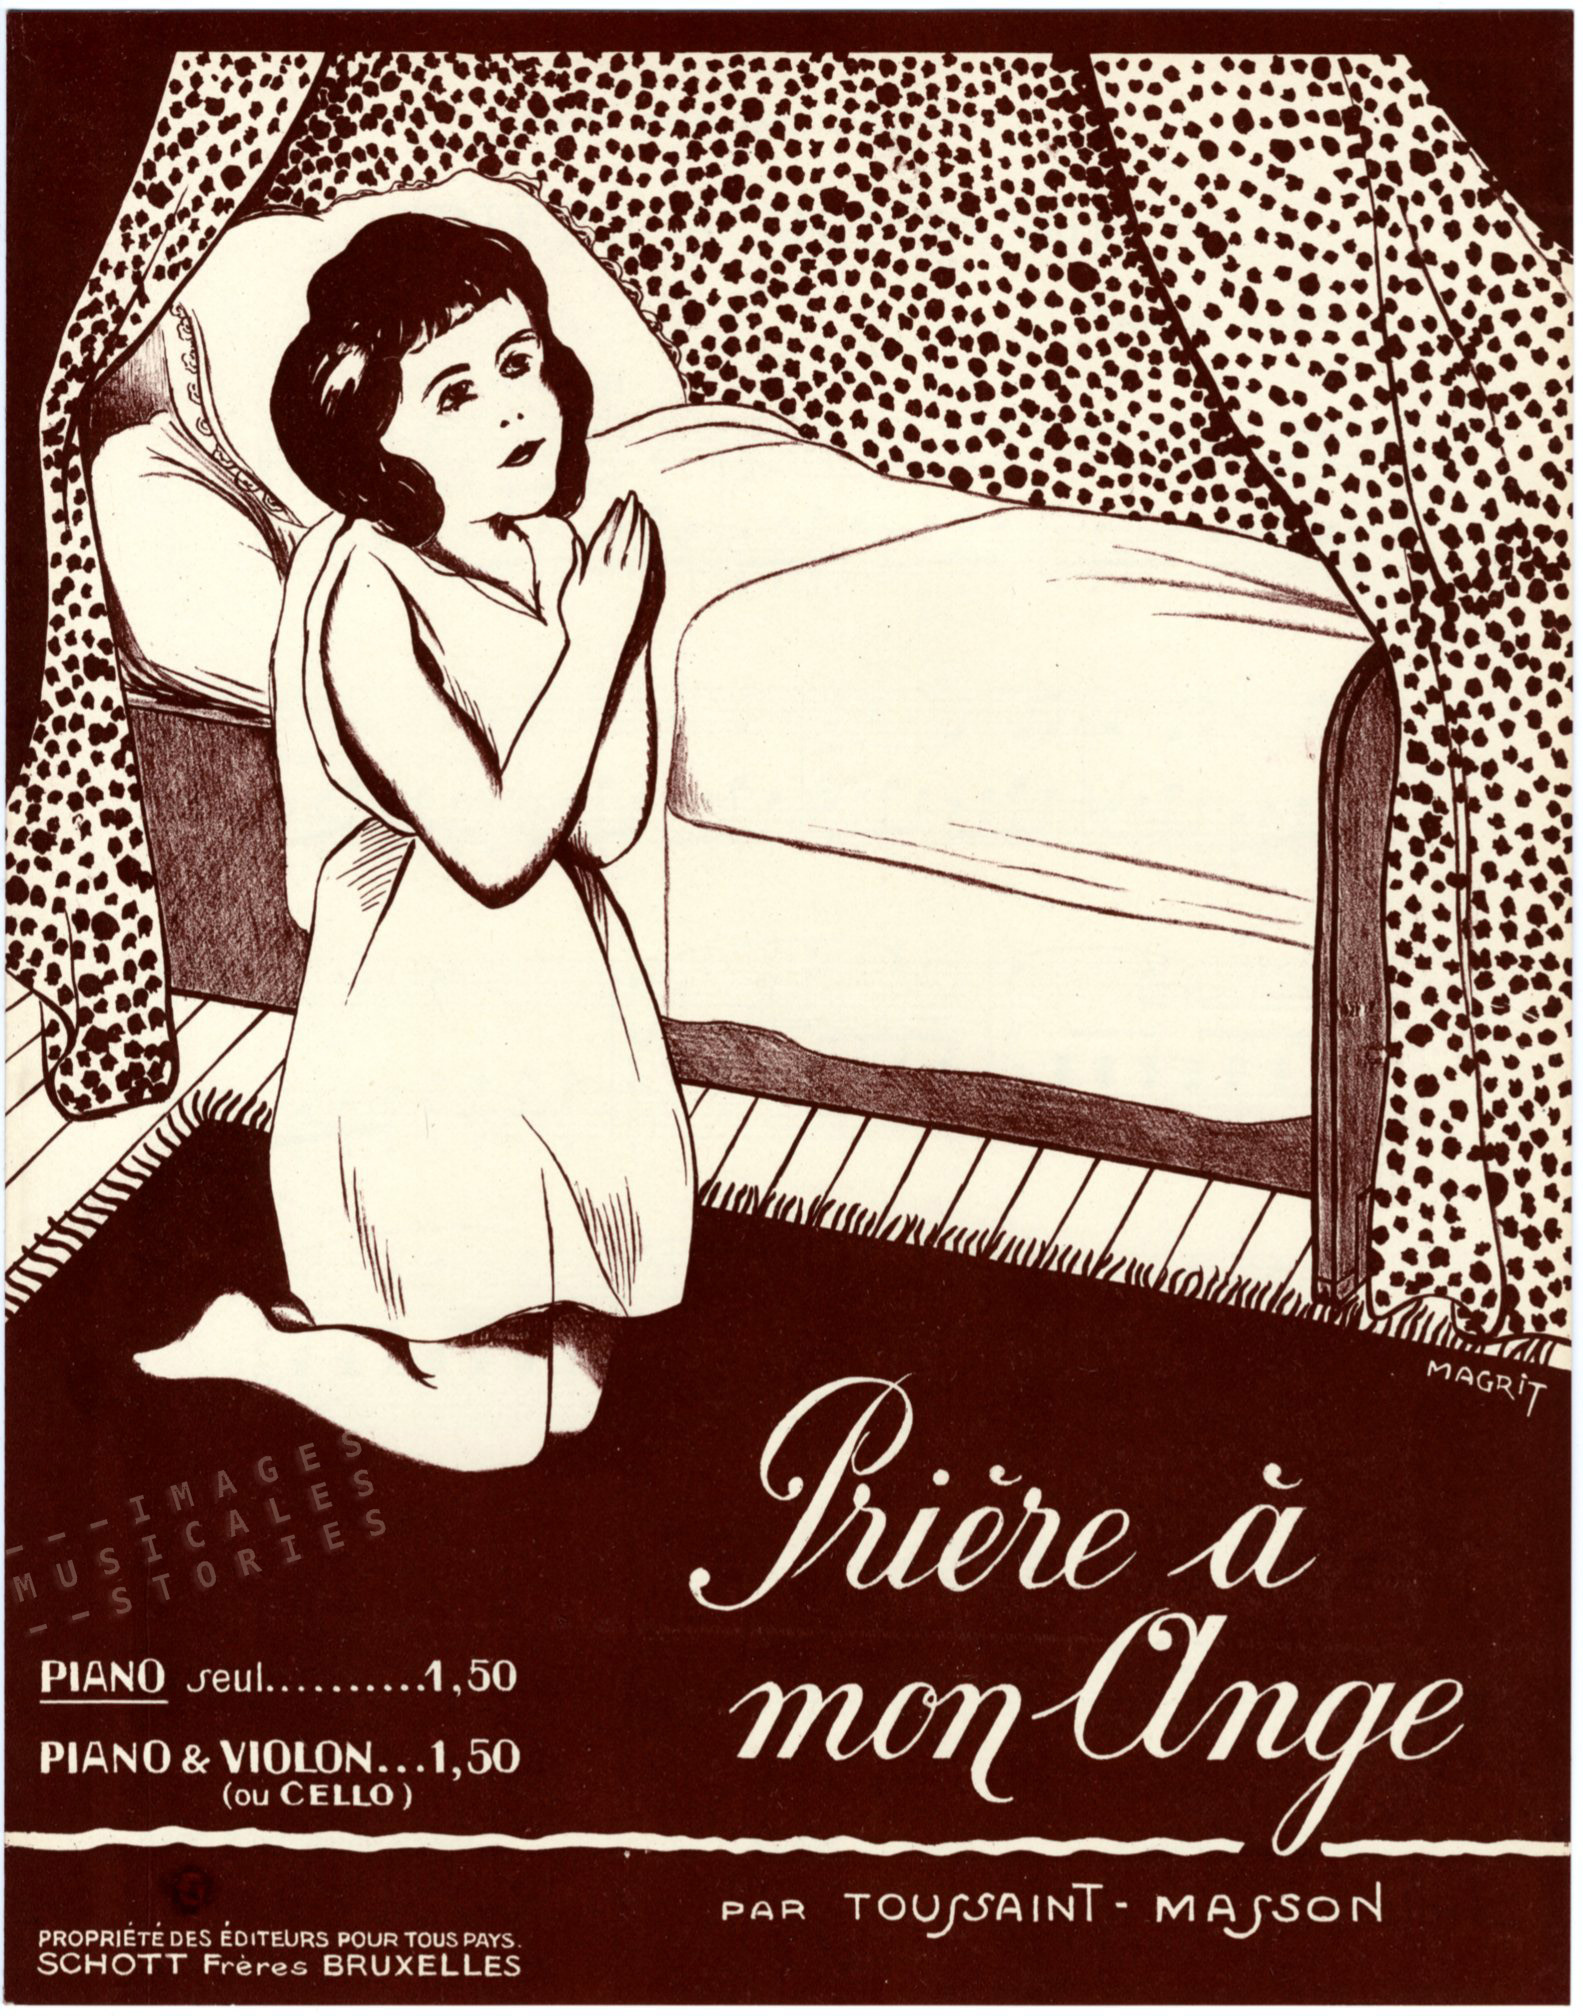 Sheet music cover illustrated by René Magritte: 'Prière à mon ante' by Toussain Masson (1924)